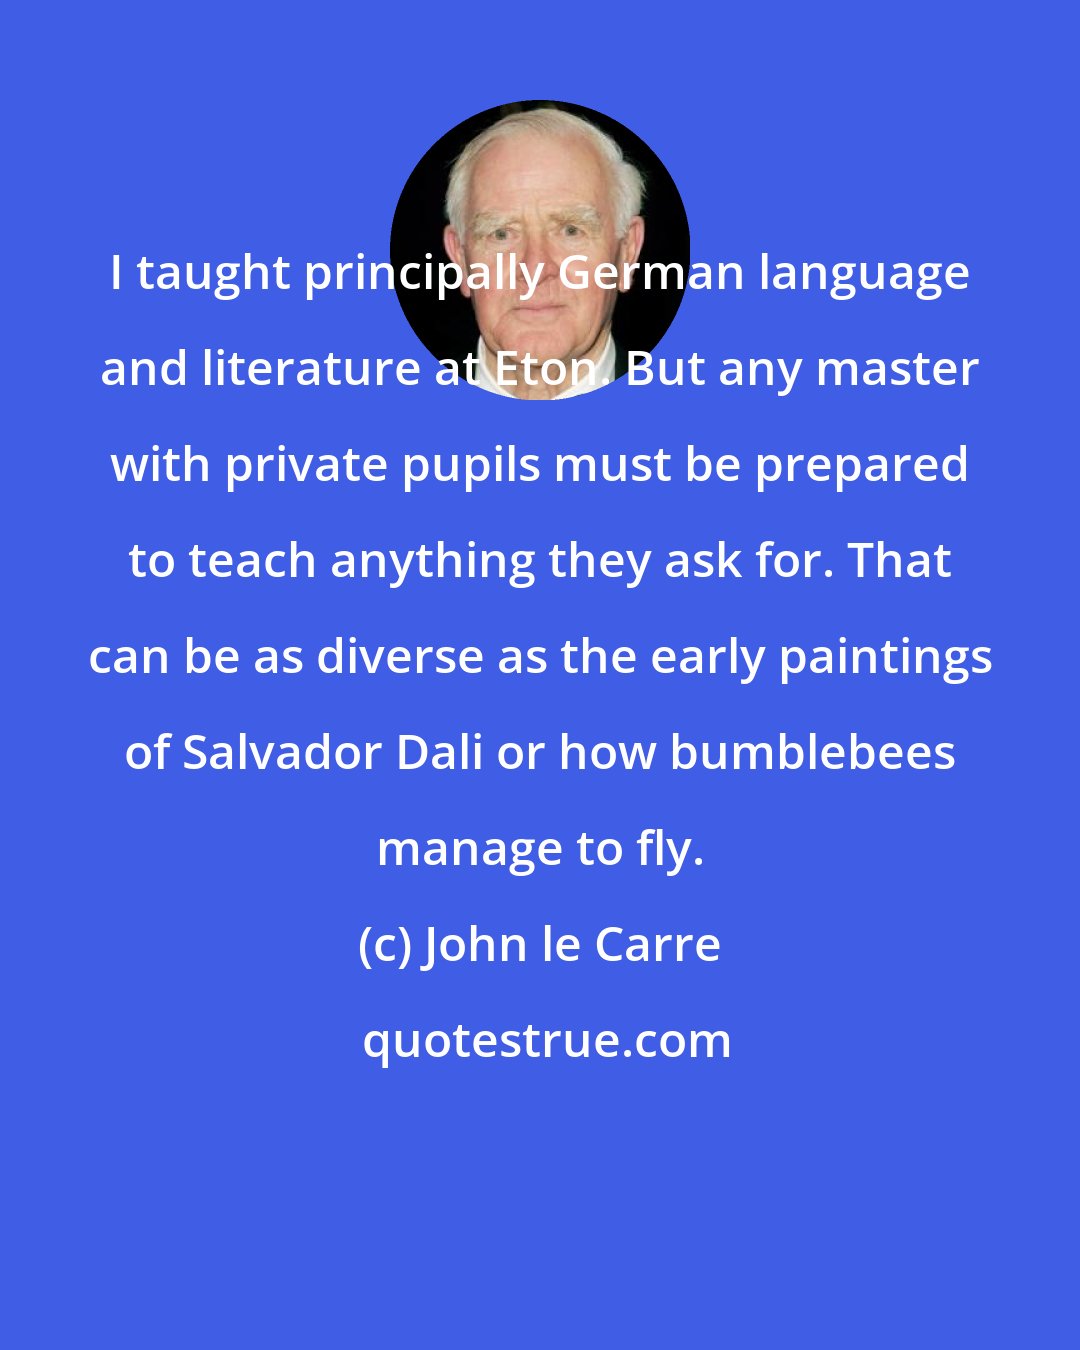 John le Carre: I taught principally German language and literature at Eton. But any master with private pupils must be prepared to teach anything they ask for. That can be as diverse as the early paintings of Salvador Dali or how bumblebees manage to fly.